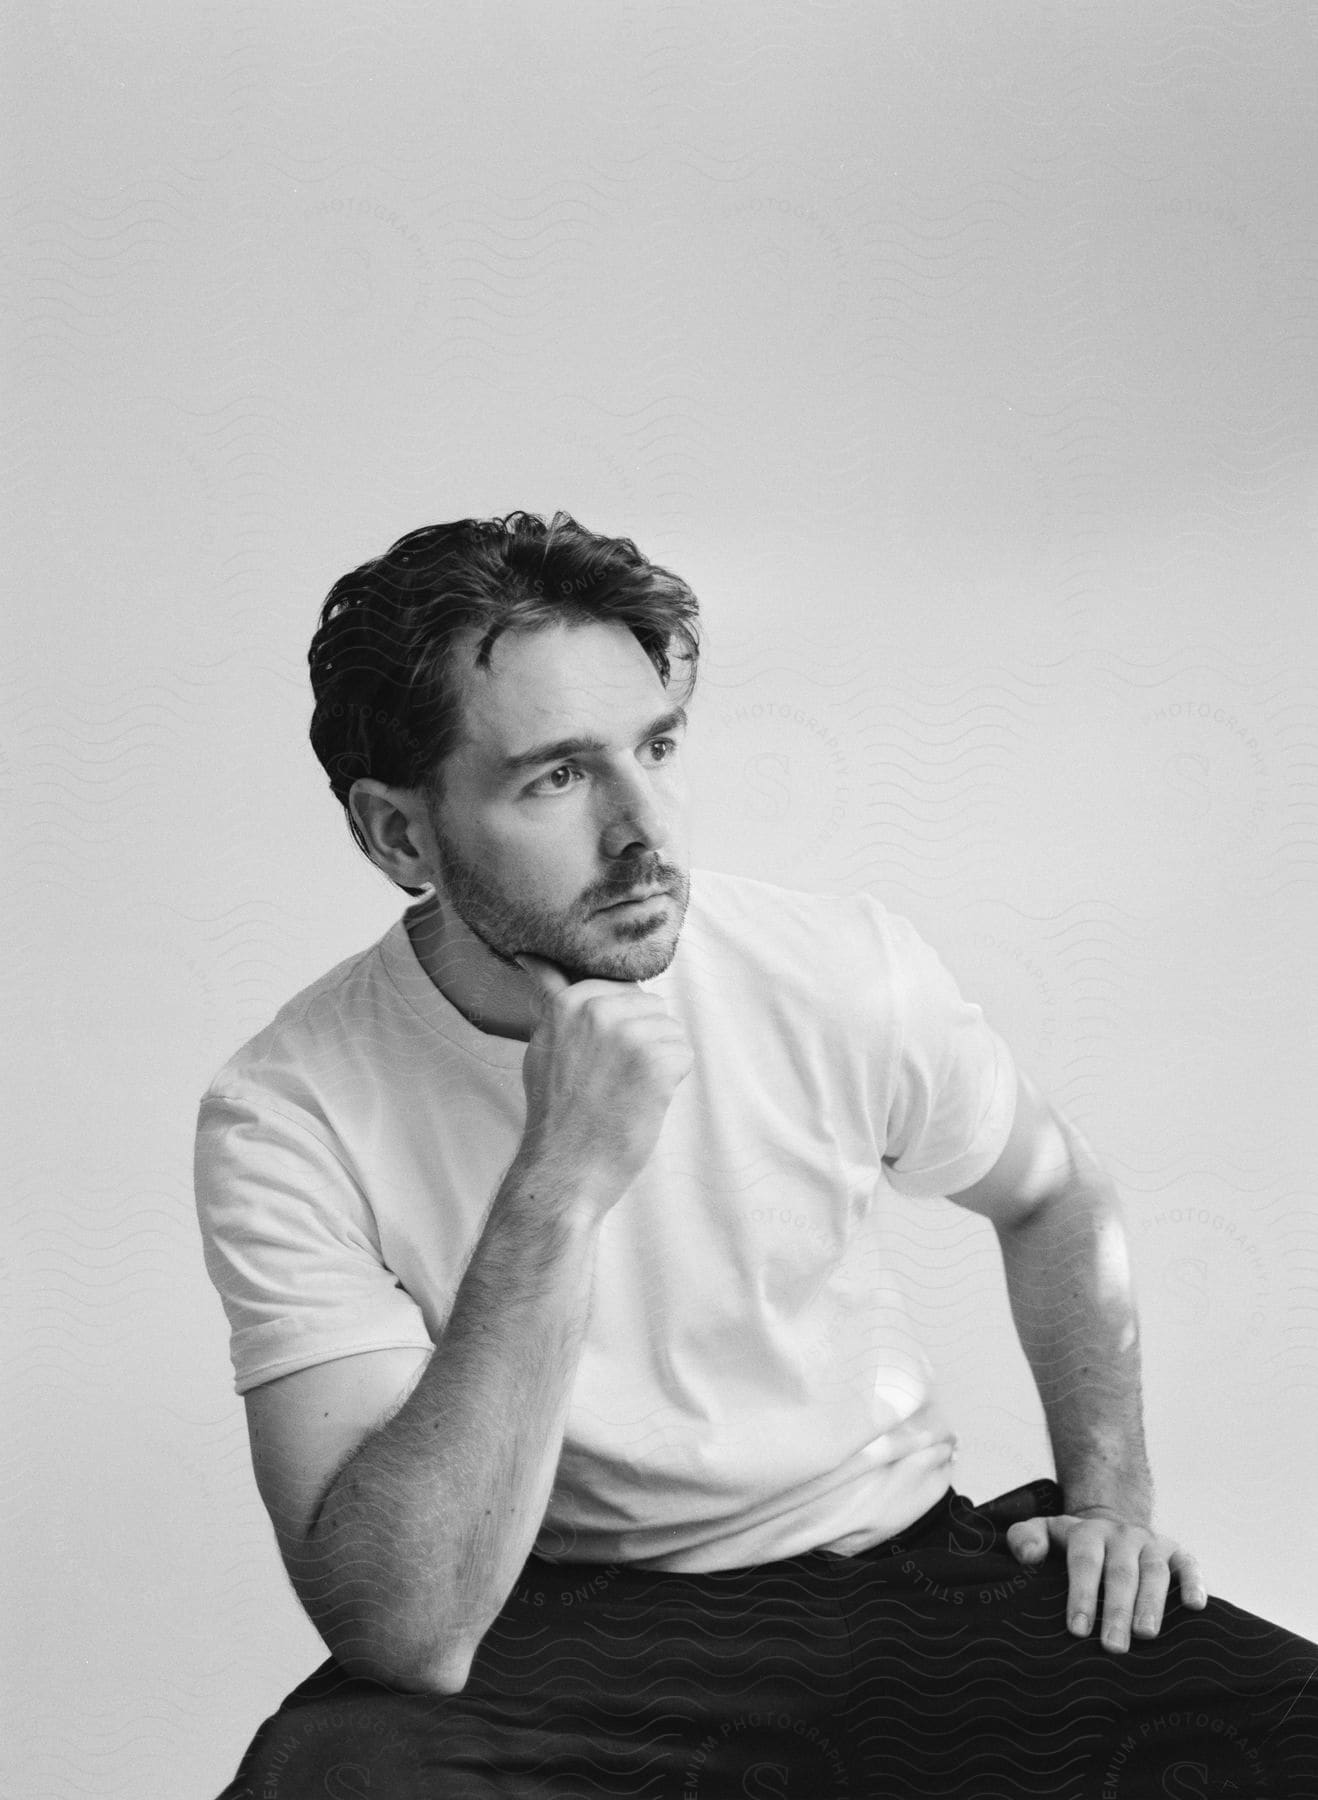 A man with a thin beard sits and poses while wearing dark pants and a plain white t-shirt.